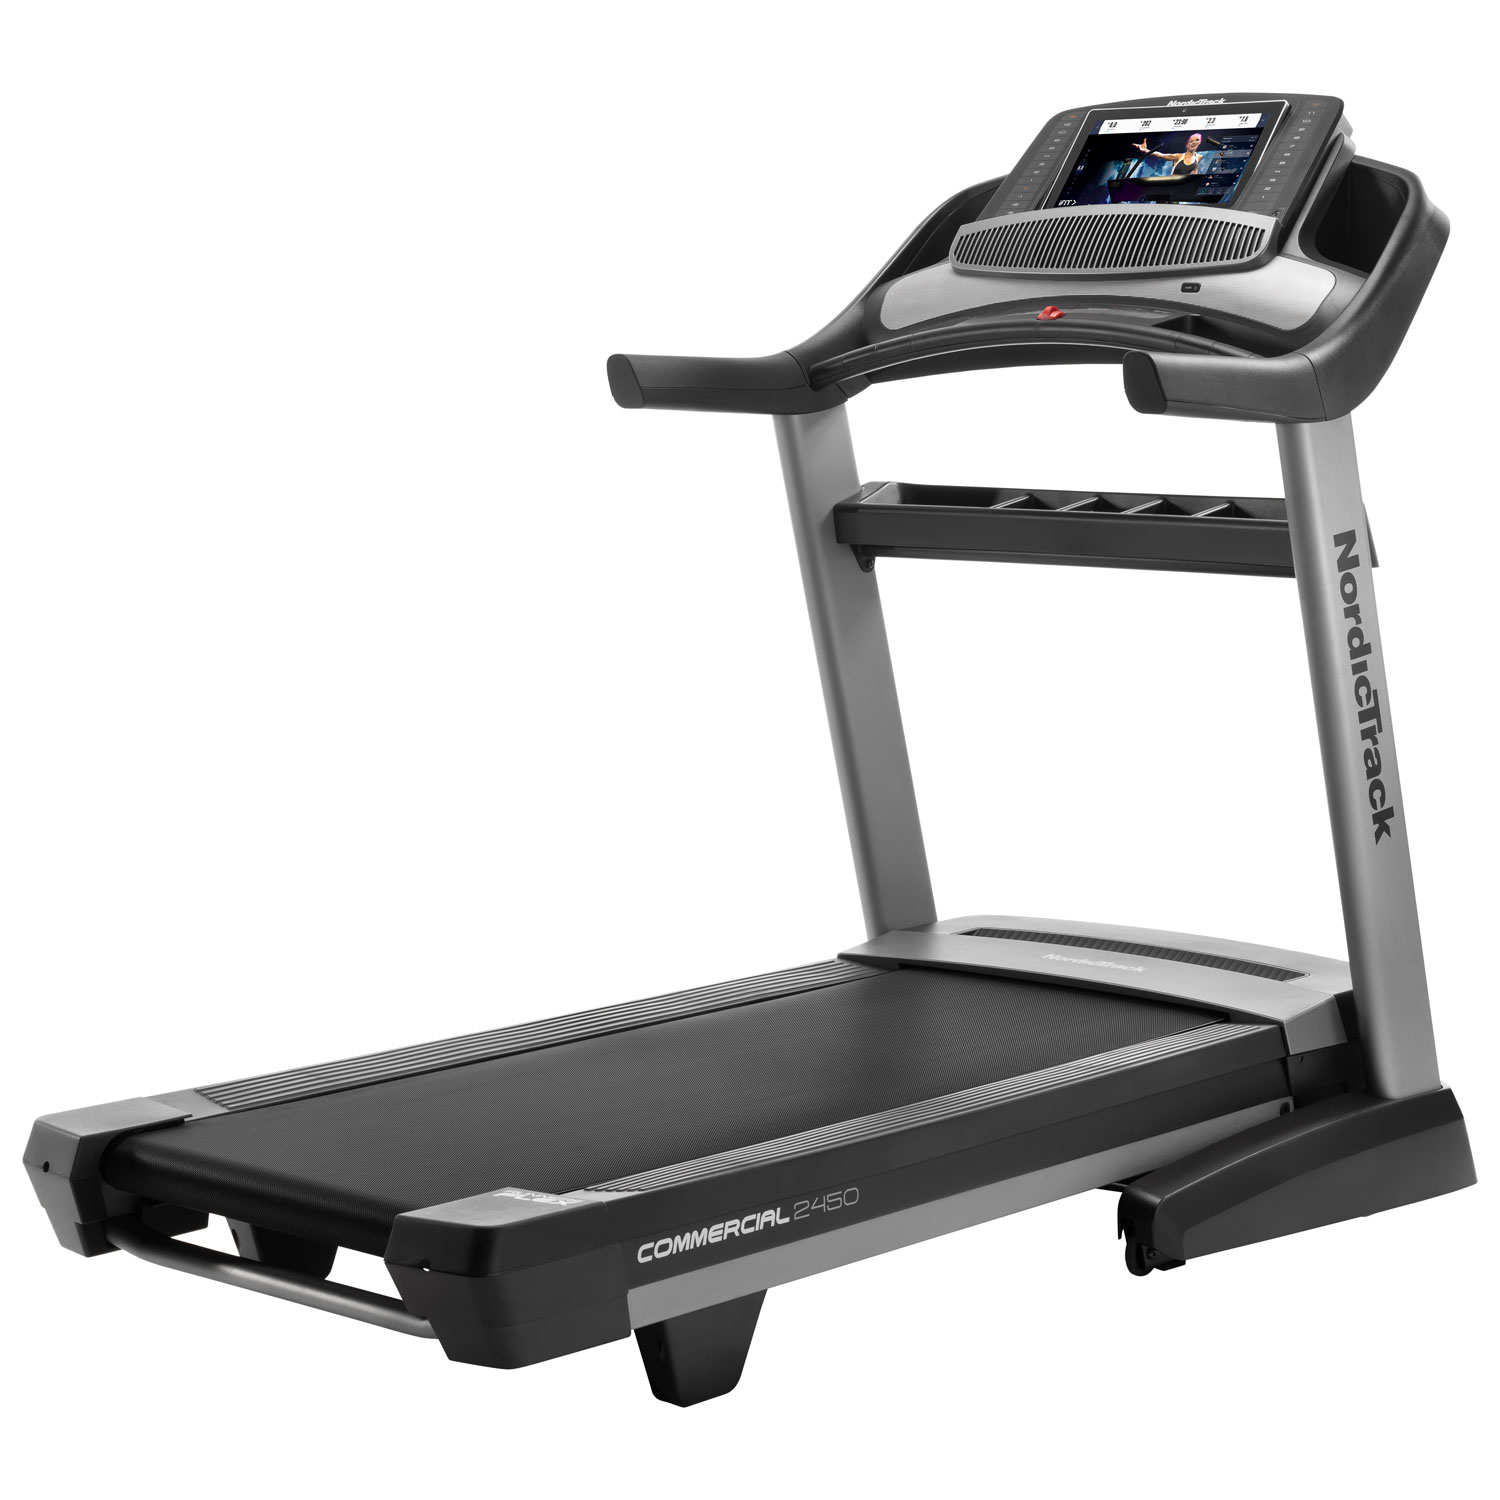 NordicTrack Commercial 2450 Folding Treadmill with 30-Day iFit Membership Included - 2021 Model